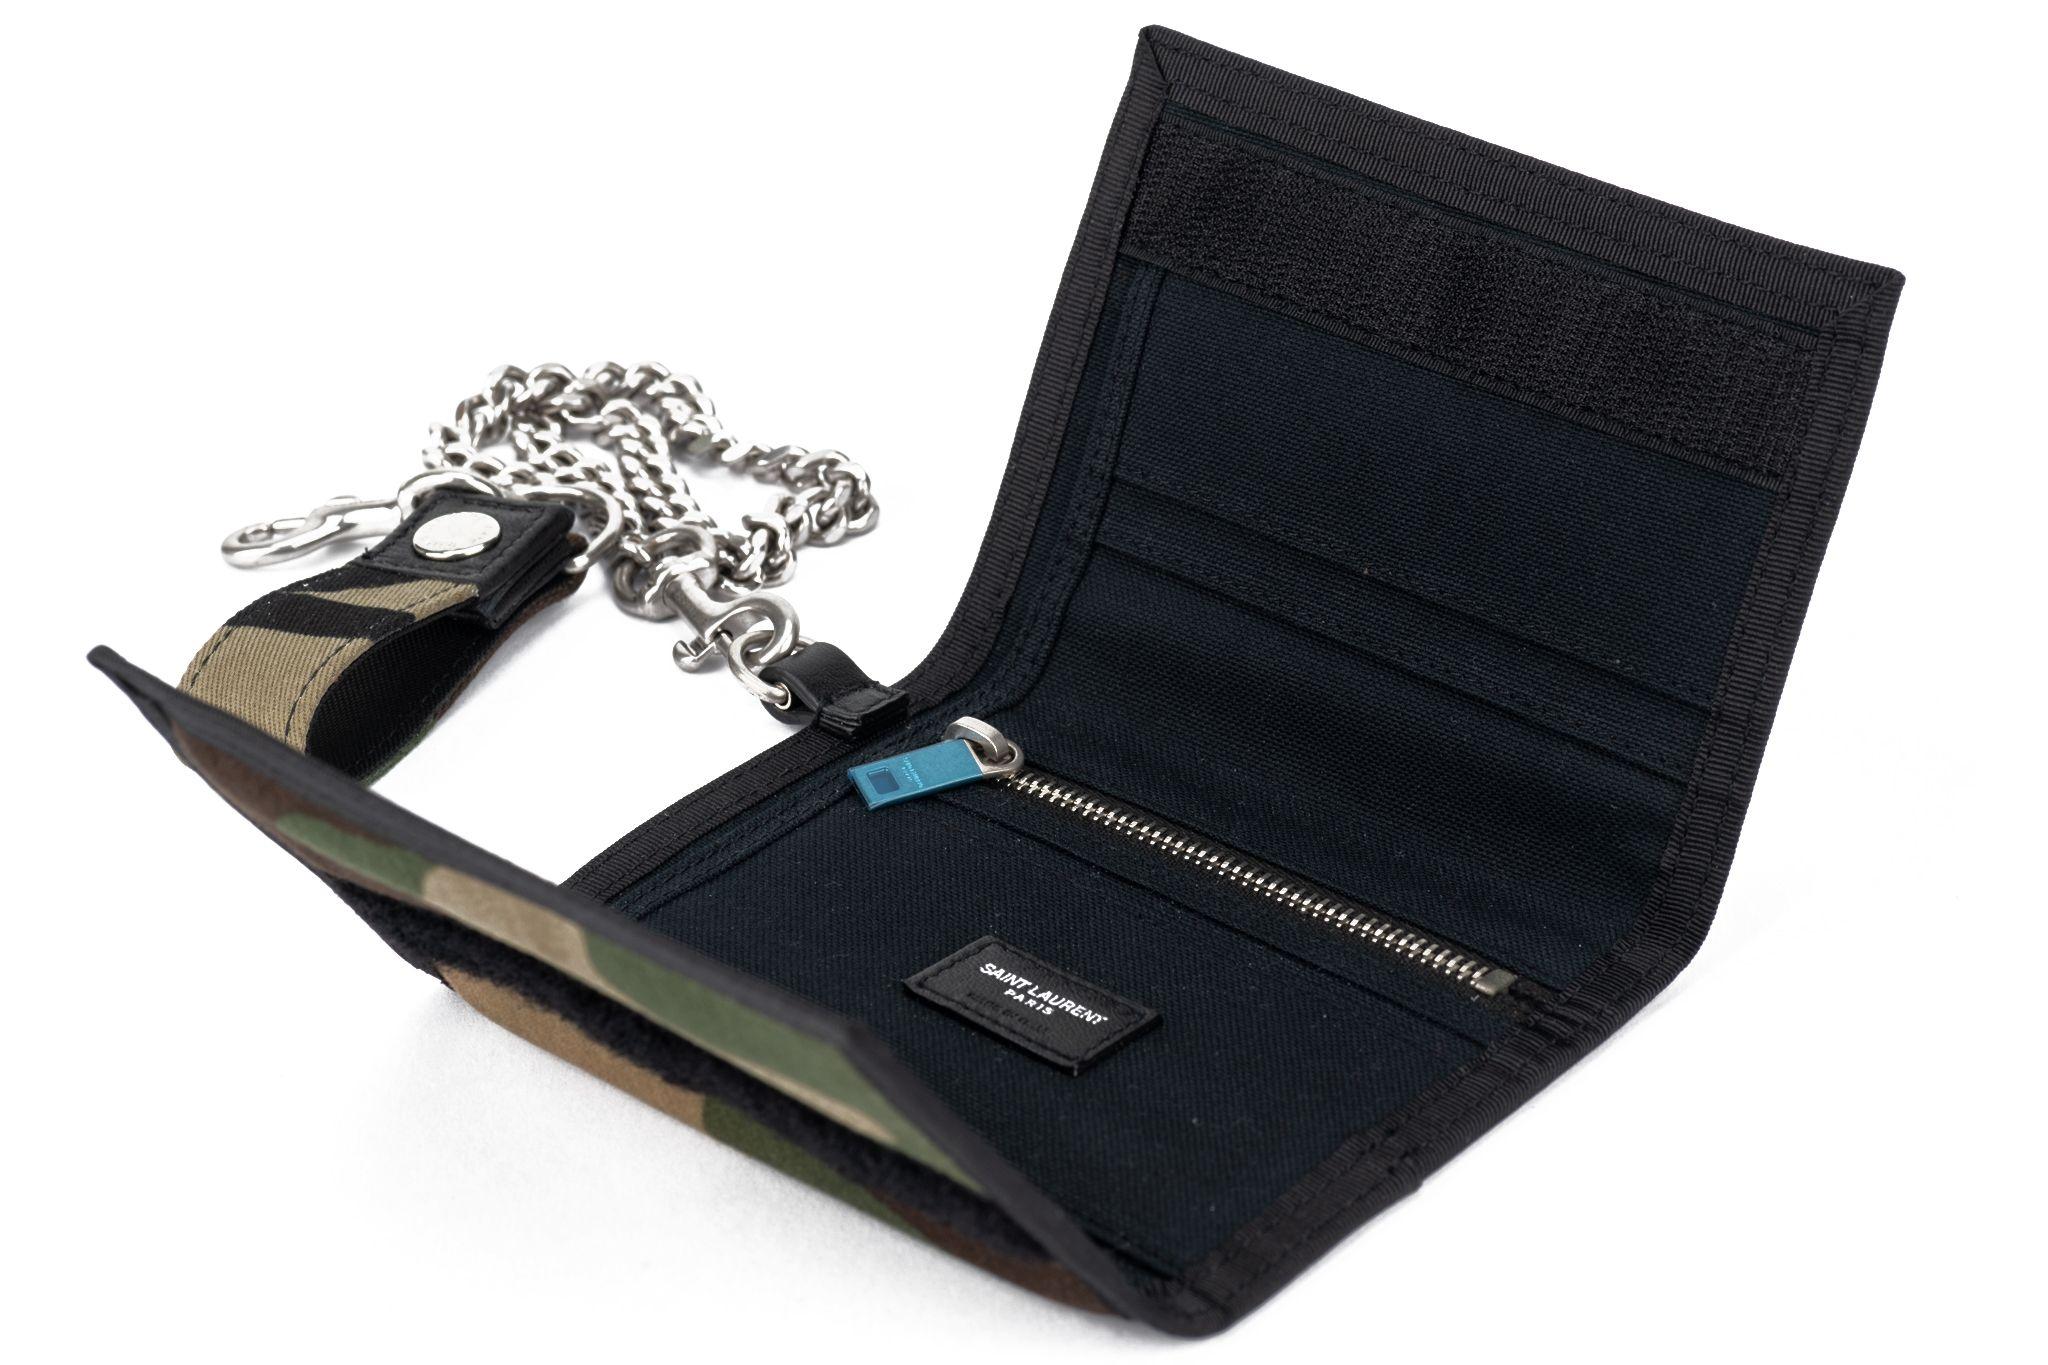 YSL new men's camouflage velcro wallet. Detachable chain measures 16 inches .
Comes with original dustcover and box.